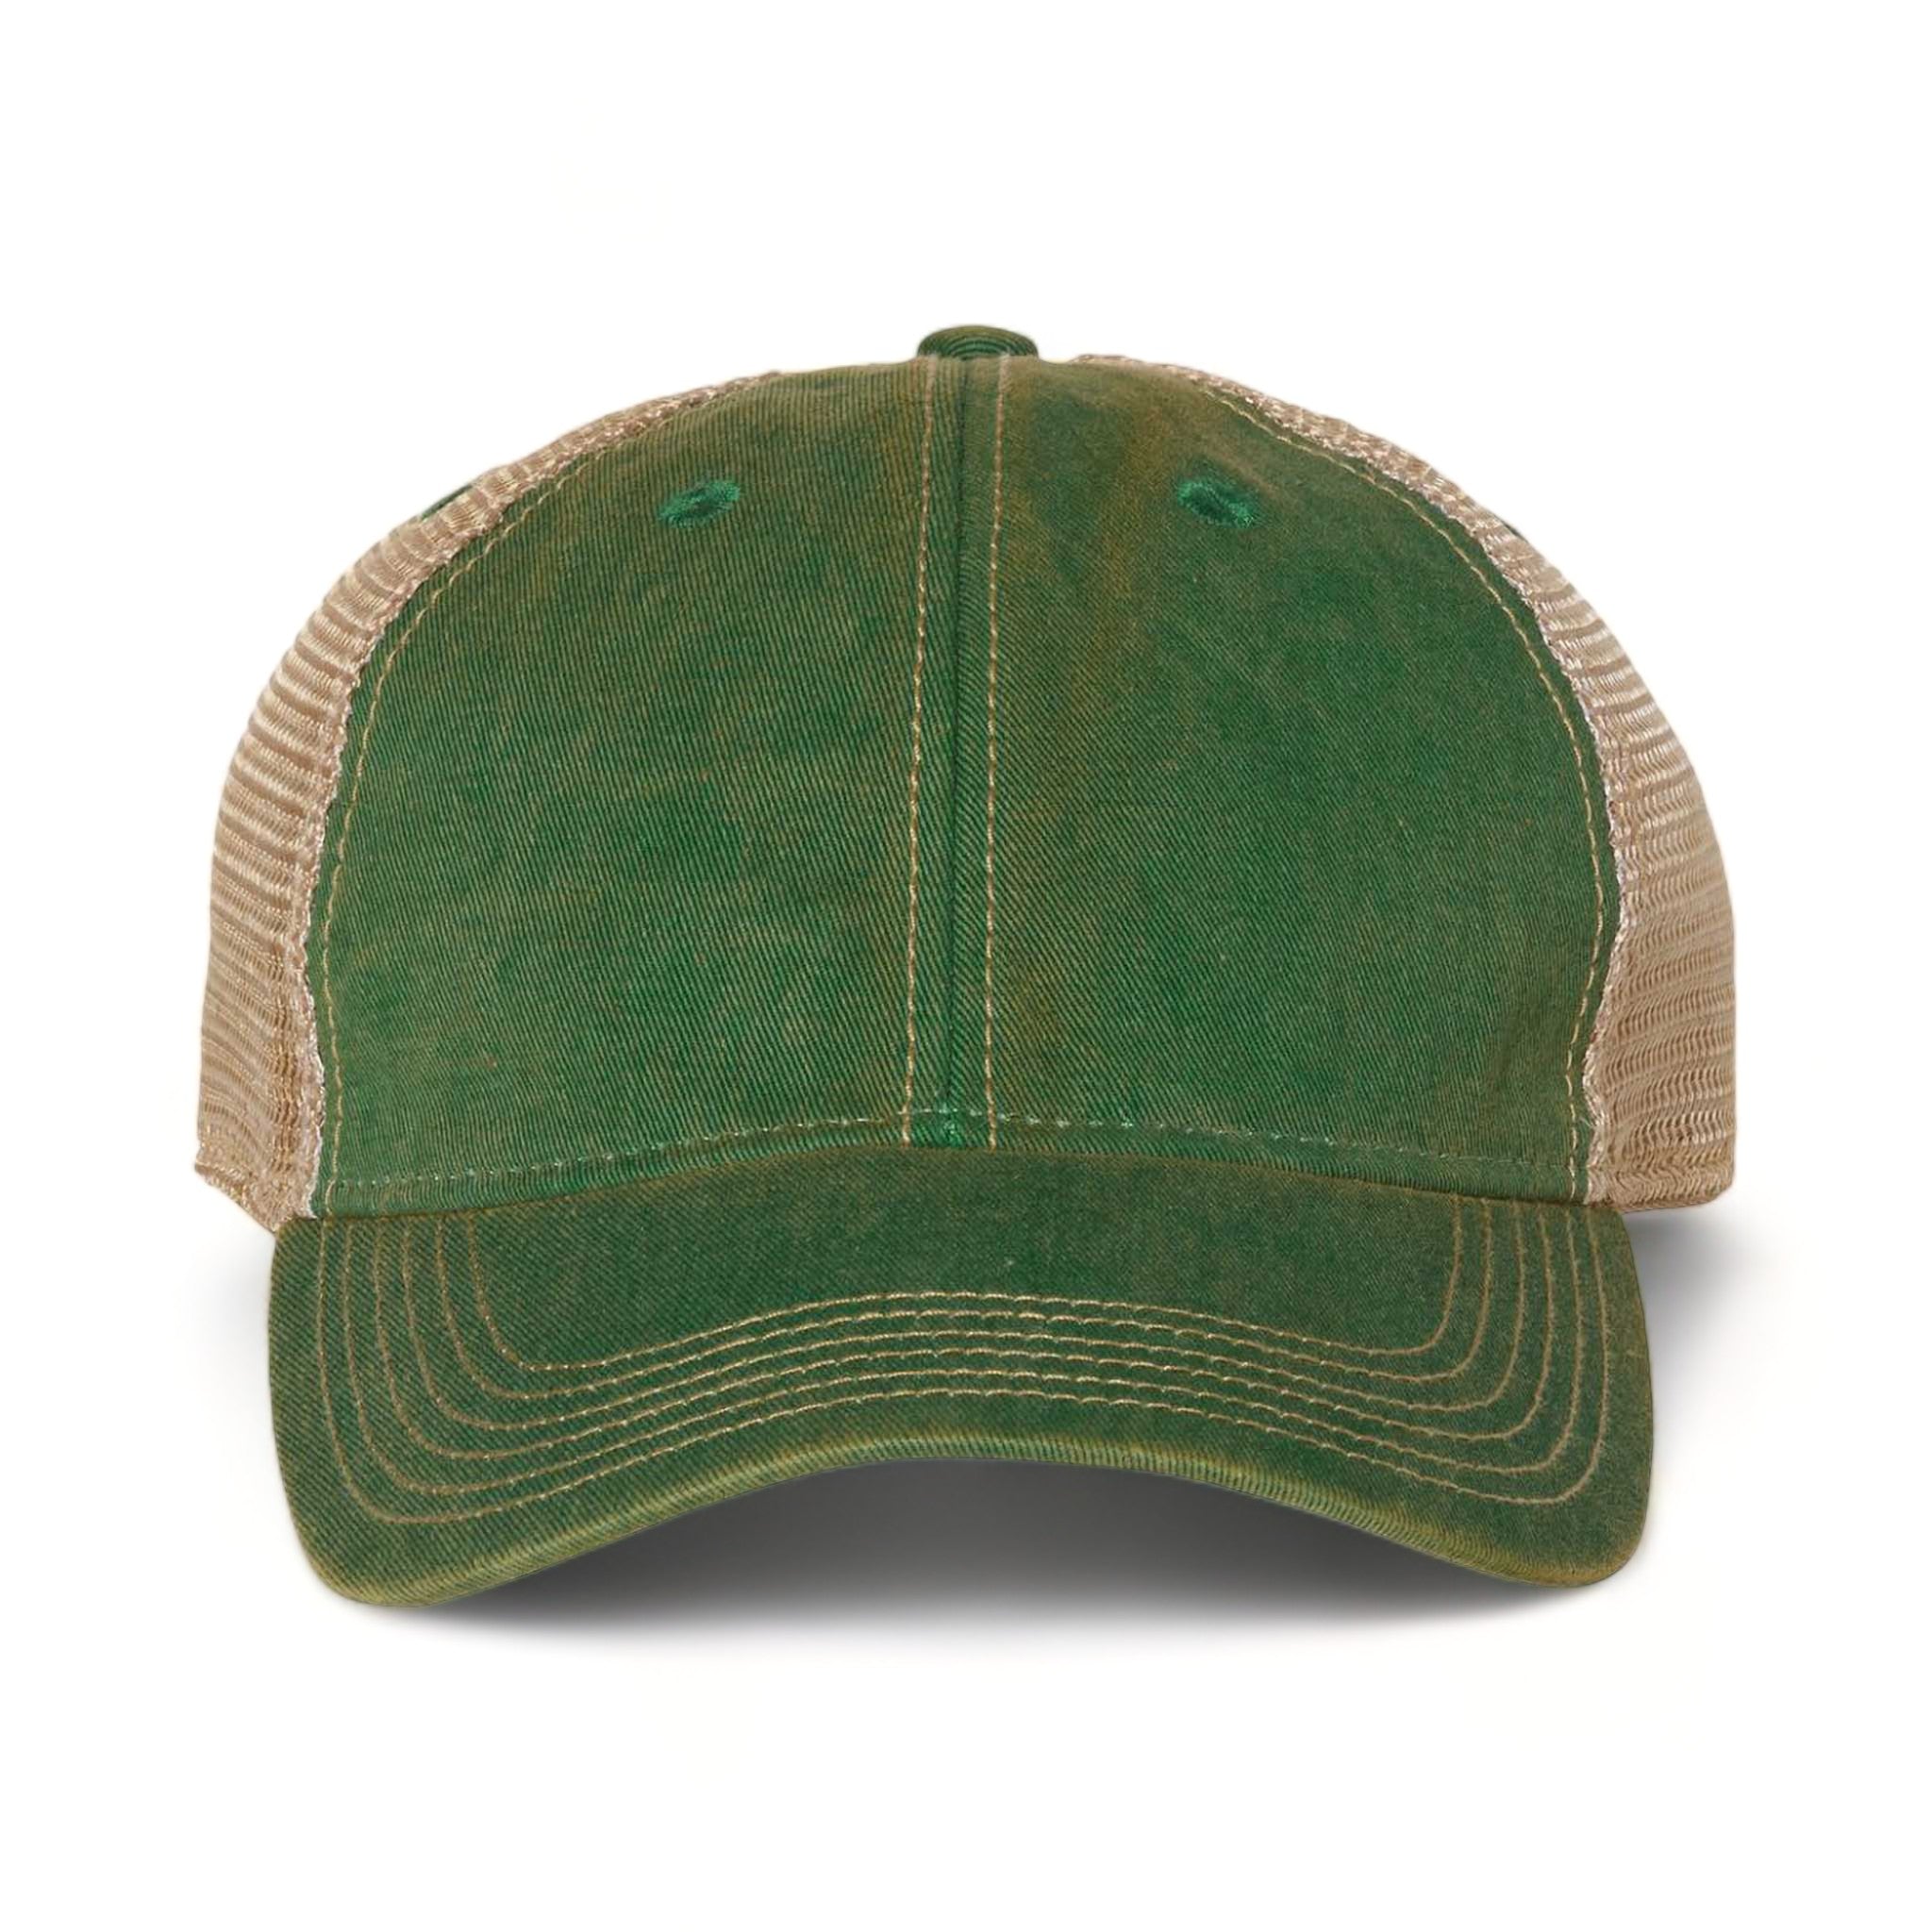 Front view of LEGACY OFA custom hat in kelly green and khaki